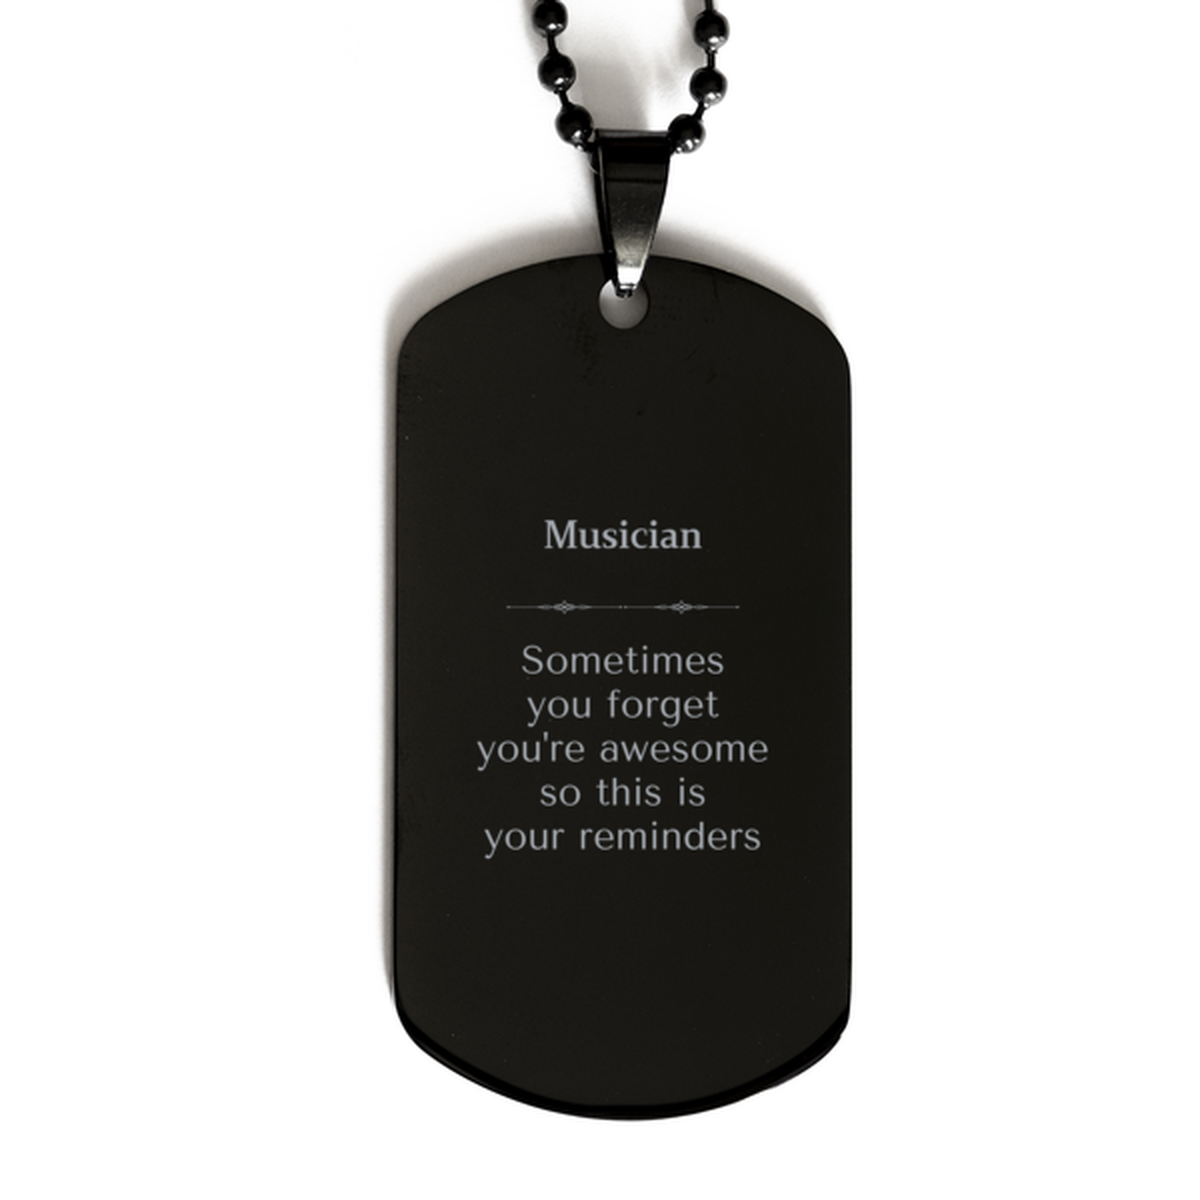 Sentimental Musician Black Dog Tag, Musician Sometimes you forget you're awesome so this is your reminders, Graduation Christmas Birthday Gifts for Musician, Men, Women, Coworkers